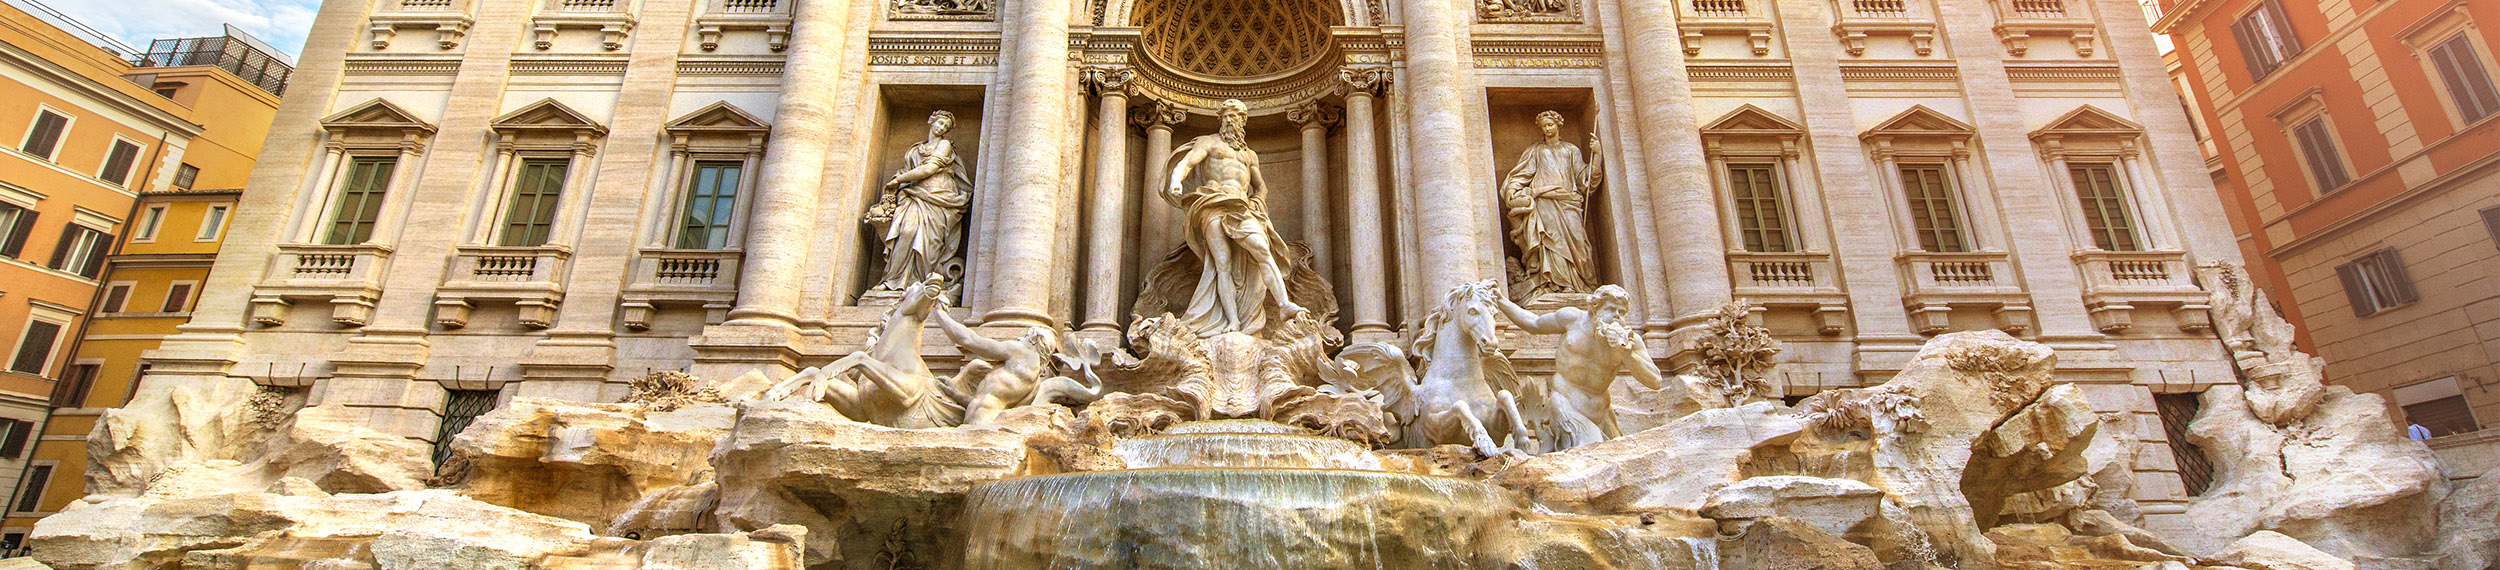 View of the iconic Trevi Fountain in Rome, Italy. 